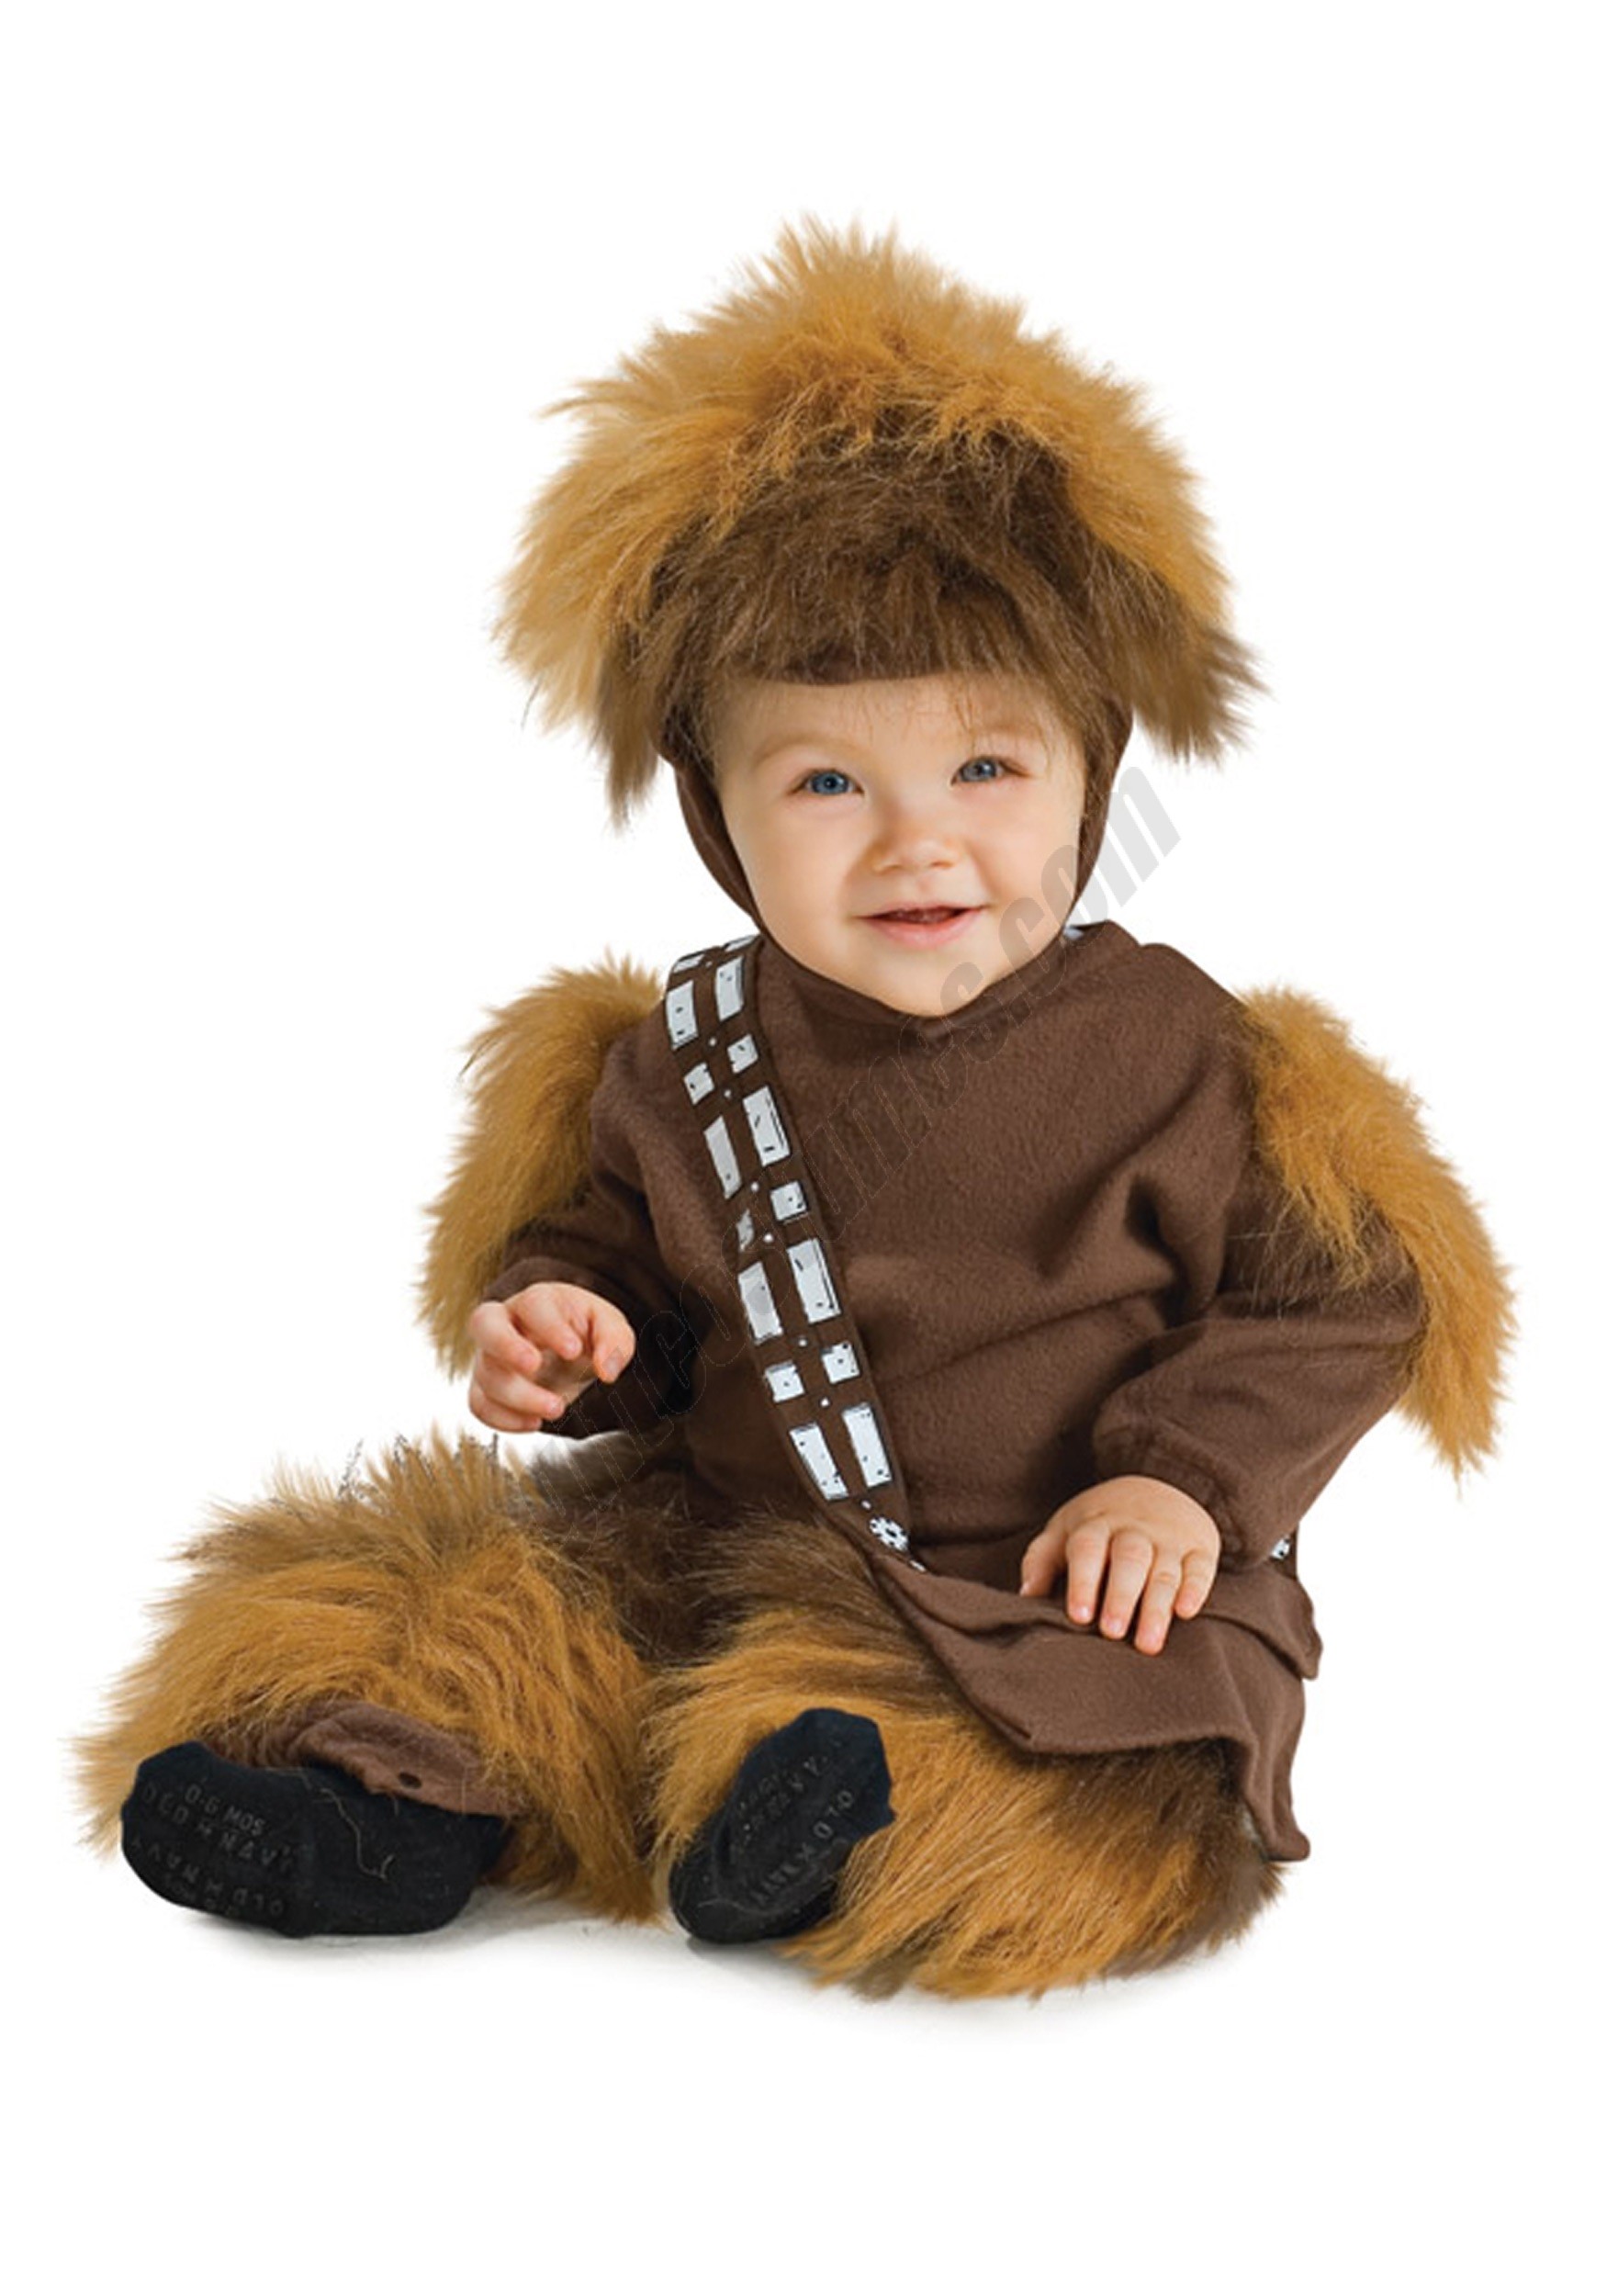 Star Wars Chewbacca Toddler Costume Promotions - Star Wars Chewbacca Toddler Costume Promotions